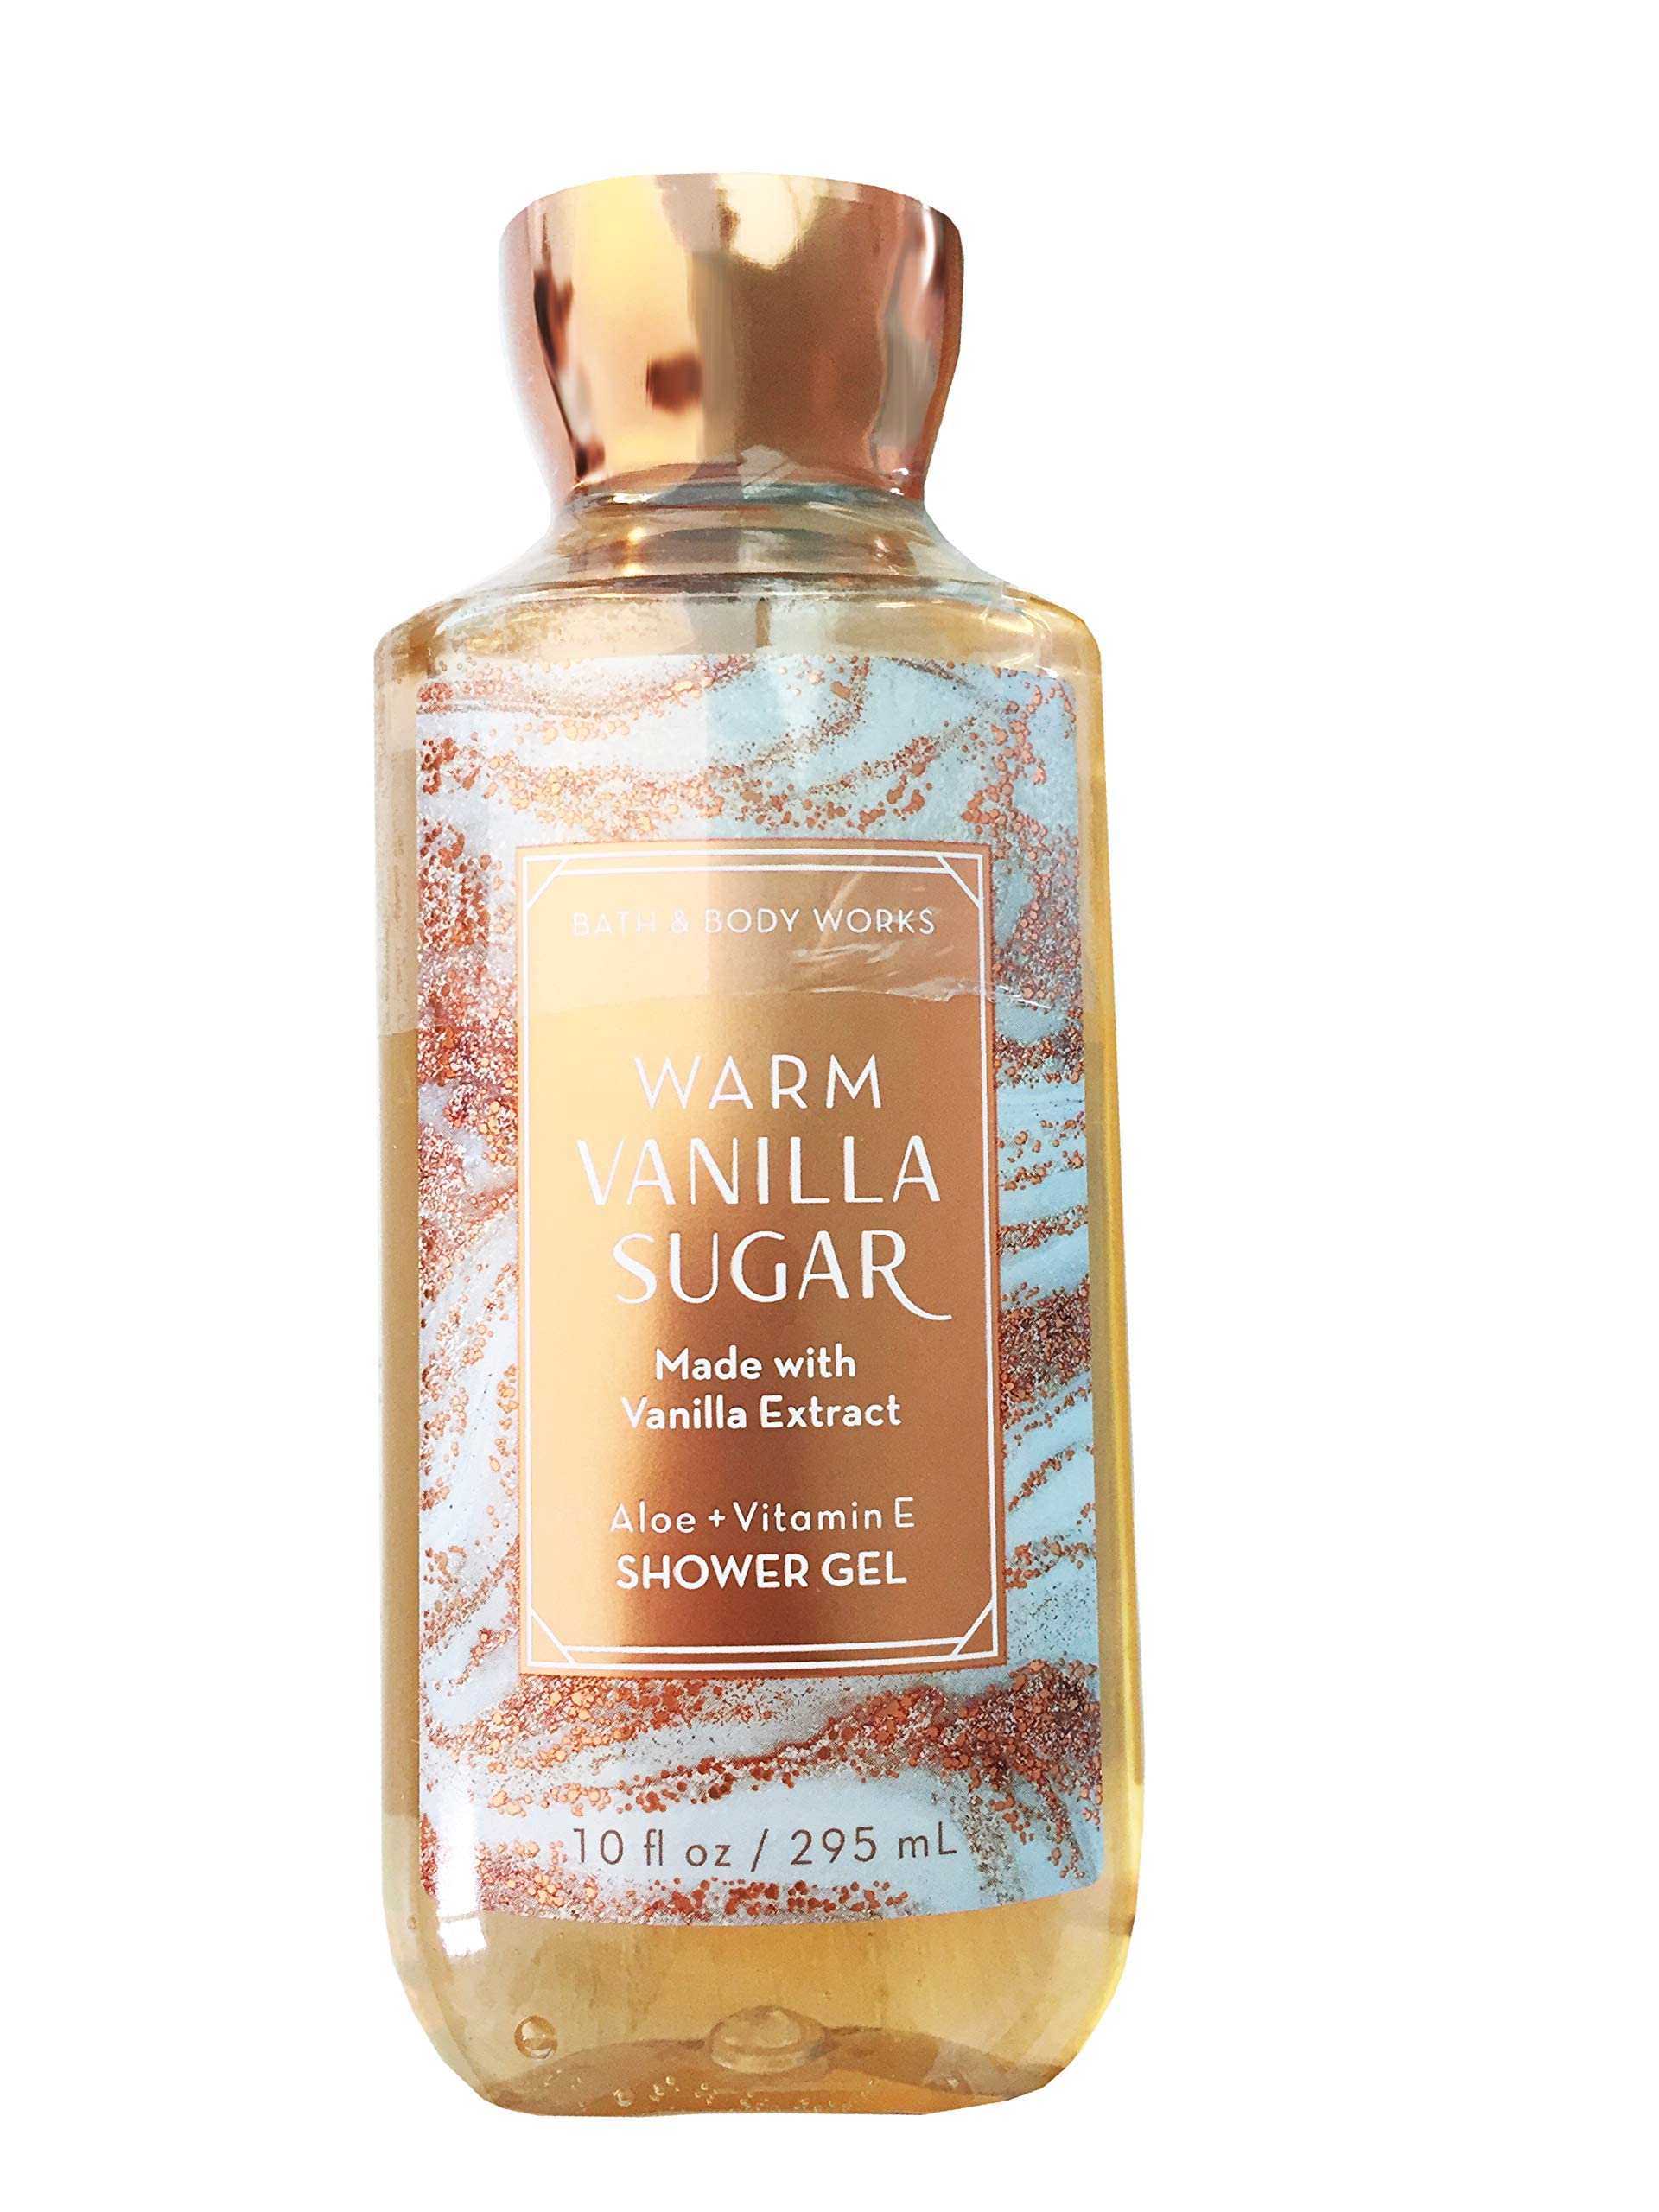 Bath and Body Works Warm Vanilla Sugar Signature Collection Shower Gel, 10 oz, new packaging